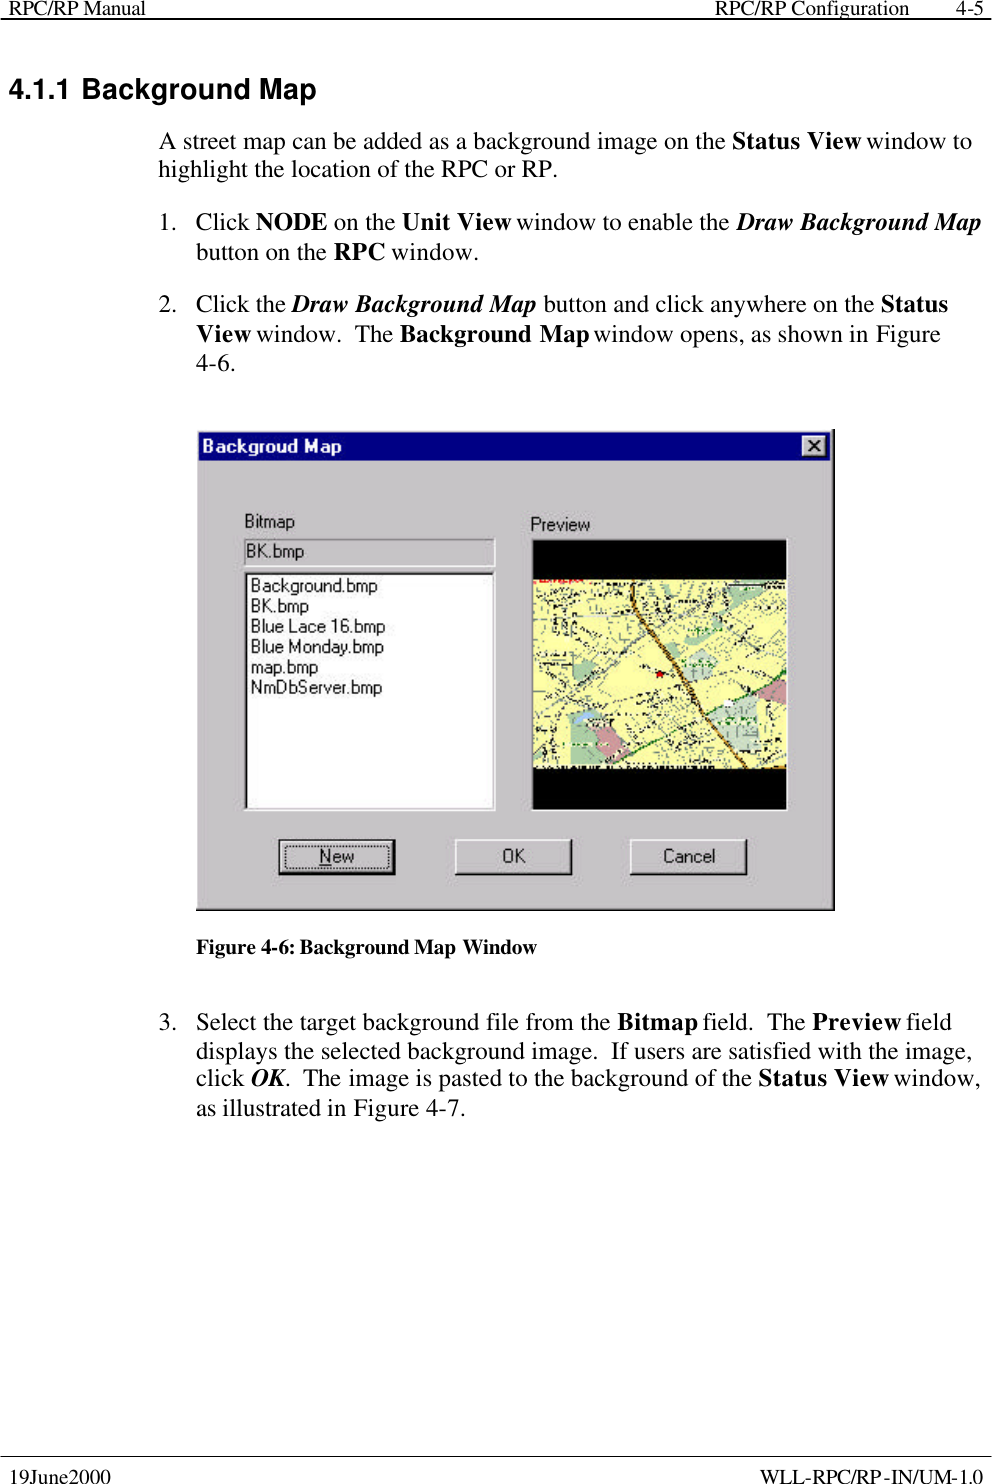 RPC/RP Manual    RPC/RP Configuration 19June2000    WLL-RPC/RP-IN/UM-1.0 4-54.1.1 Background Map A street map can be added as a background image on the Status View window to highlight the location of the RPC or RP.   1.  Click NODE on the Unit View window to enable the Draw Background Map button on the RPC window. 2.  Click the Draw Background Map button and click anywhere on the Status View window.  The Background Map window opens, as shown in Figure 4-6.     Figure 4-6: Background Map Window 3.  Select the target background file from the Bitmap field.  The Preview field displays the selected background image.  If users are satisfied with the image, click OK.  The image is pasted to the background of the Status View window, as illustrated in Figure 4-7.   